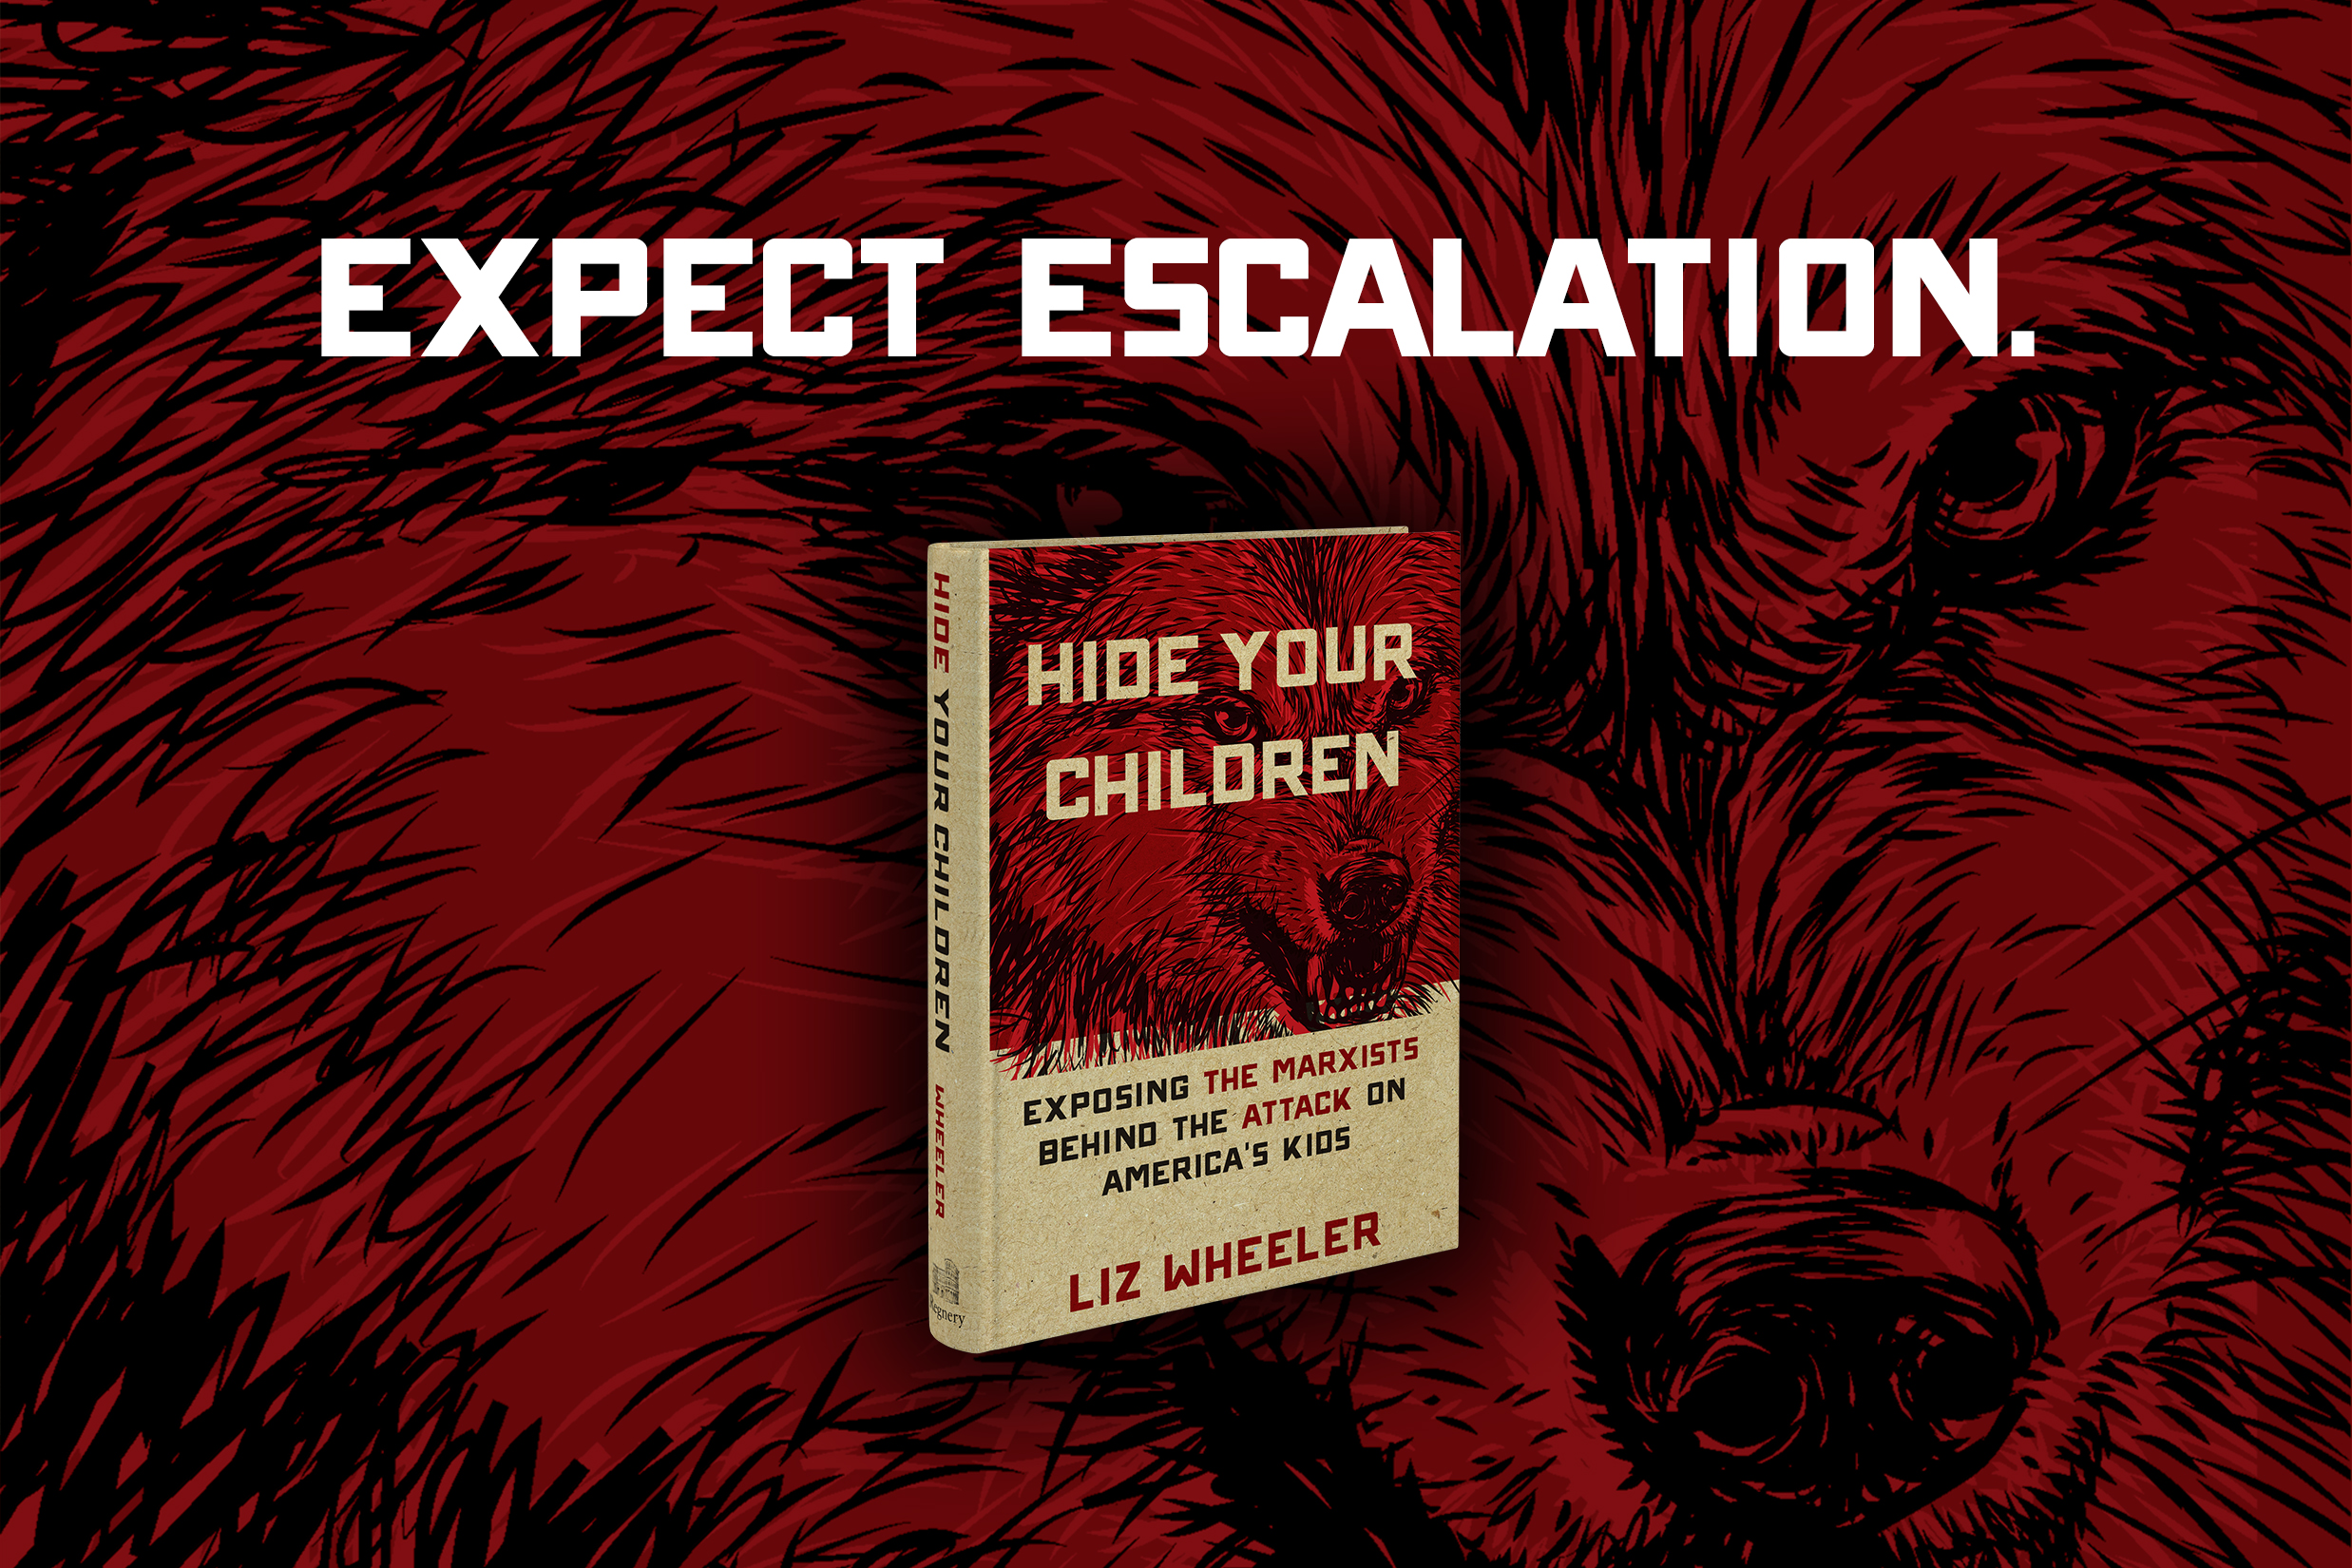 Hide Your Children is a clarion call for all Americans who value freedom, family, and the future of their country. Liz Wheeler’s powerful words ignite a sense of urgency, imploring readers to stand up against the Marxists attacking our children.